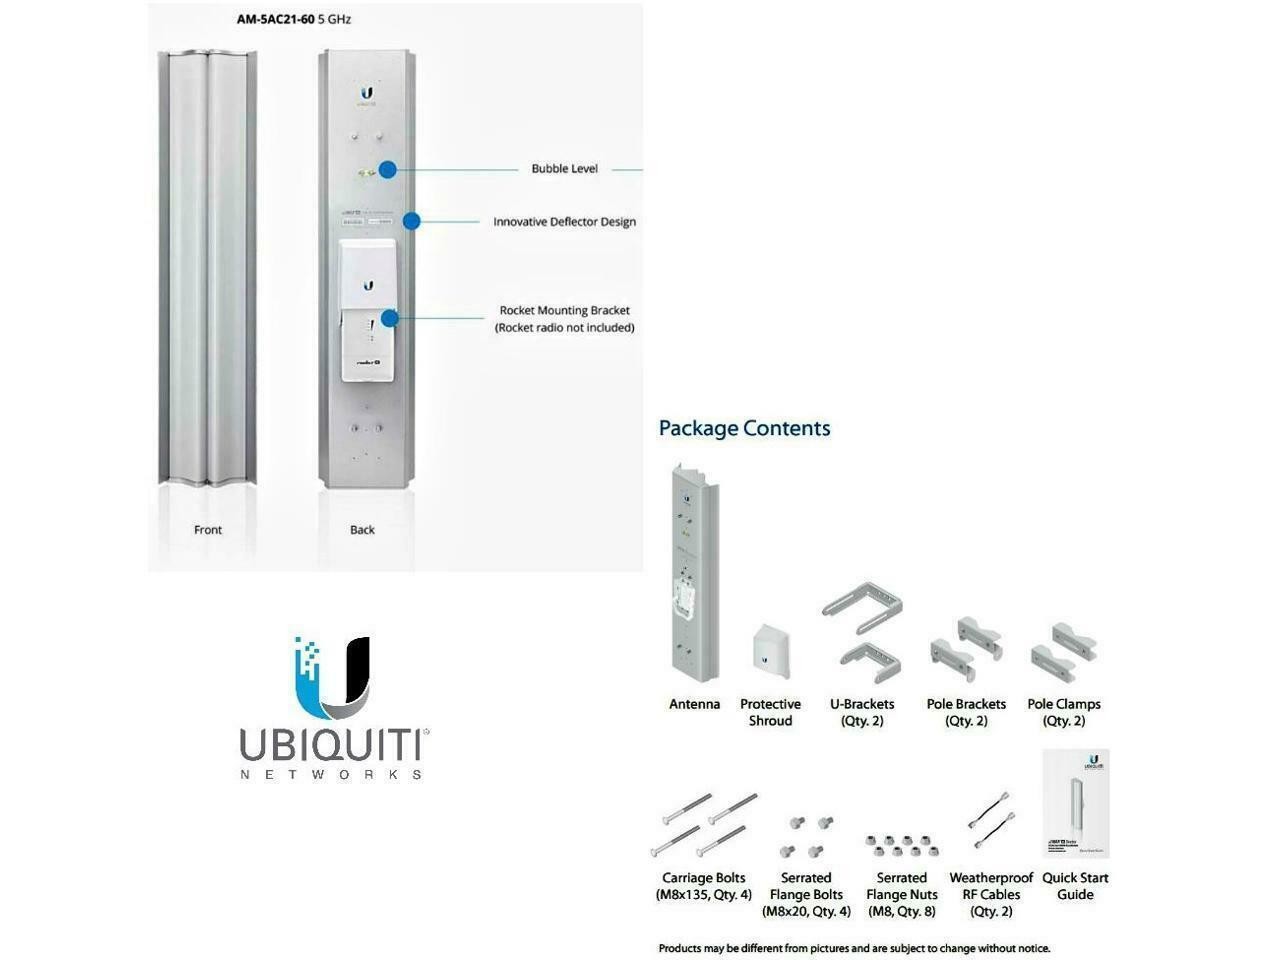 Ubiquiti 5GHz 2x2 Mimo Basestation Sector Antenna AM-5AC21-60